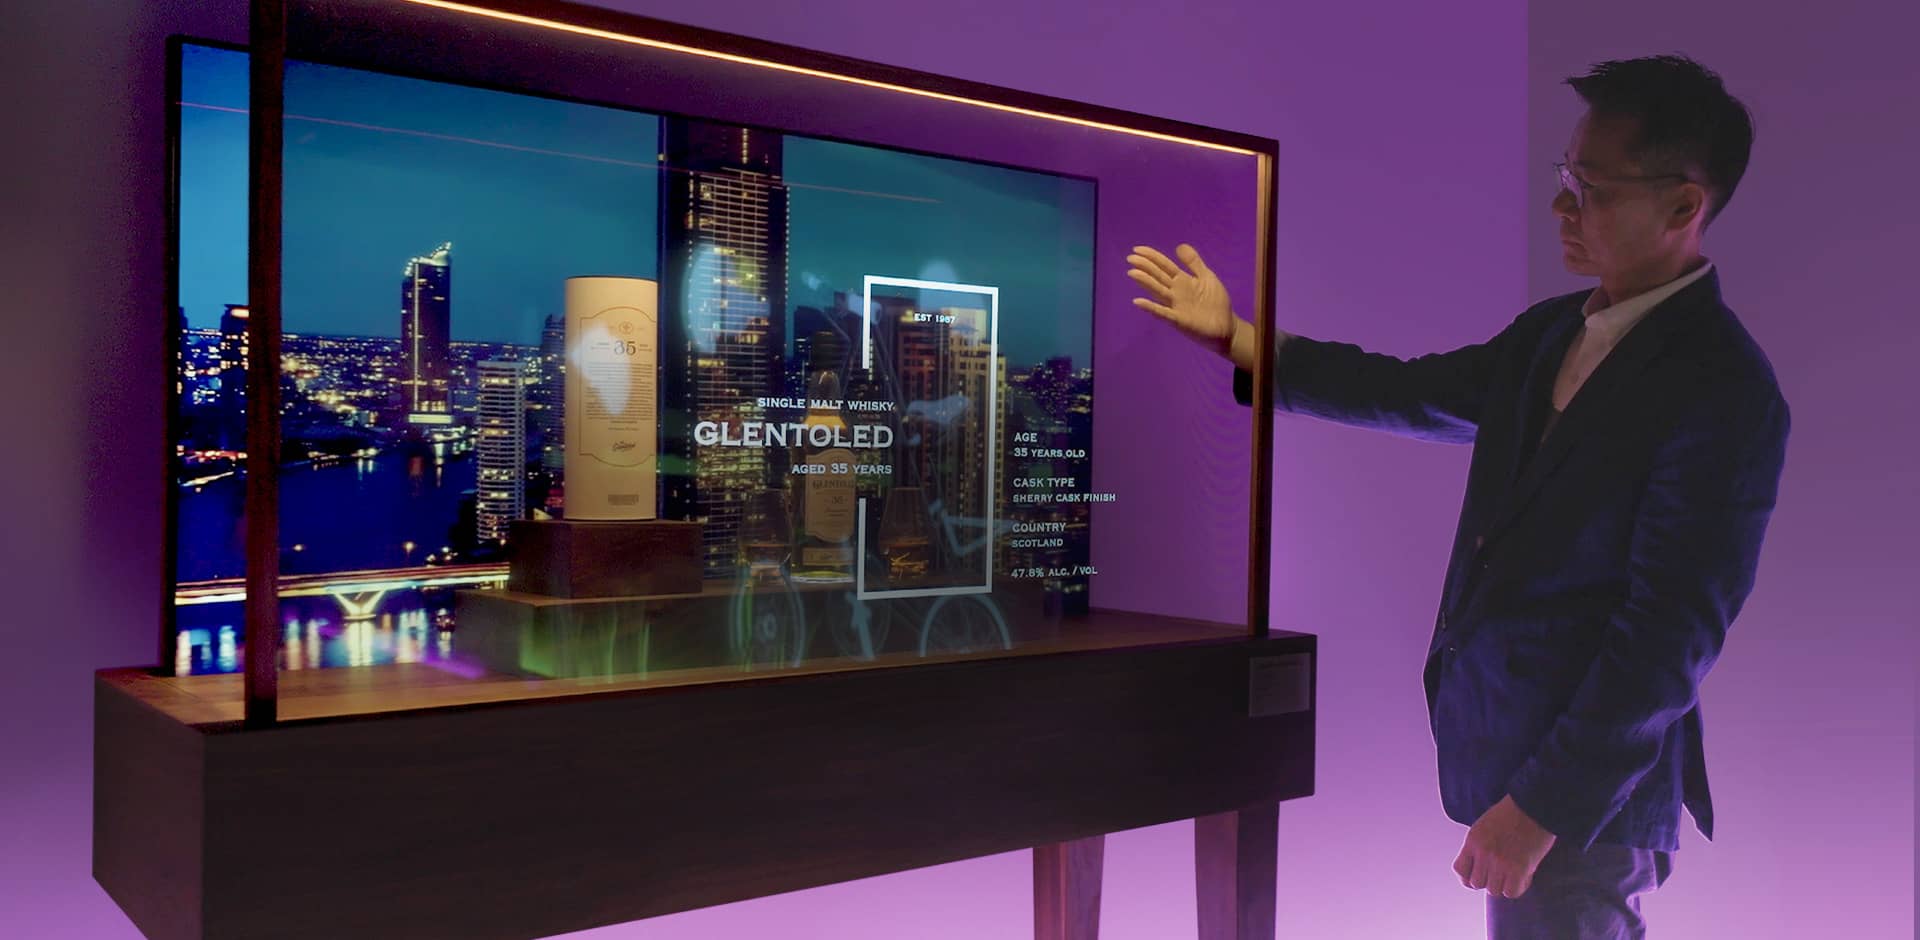 Whiskey products are displayed in the Transparent OLED showcase, and Mr. Kim is looking at the transparent screen with his hand between the displays.